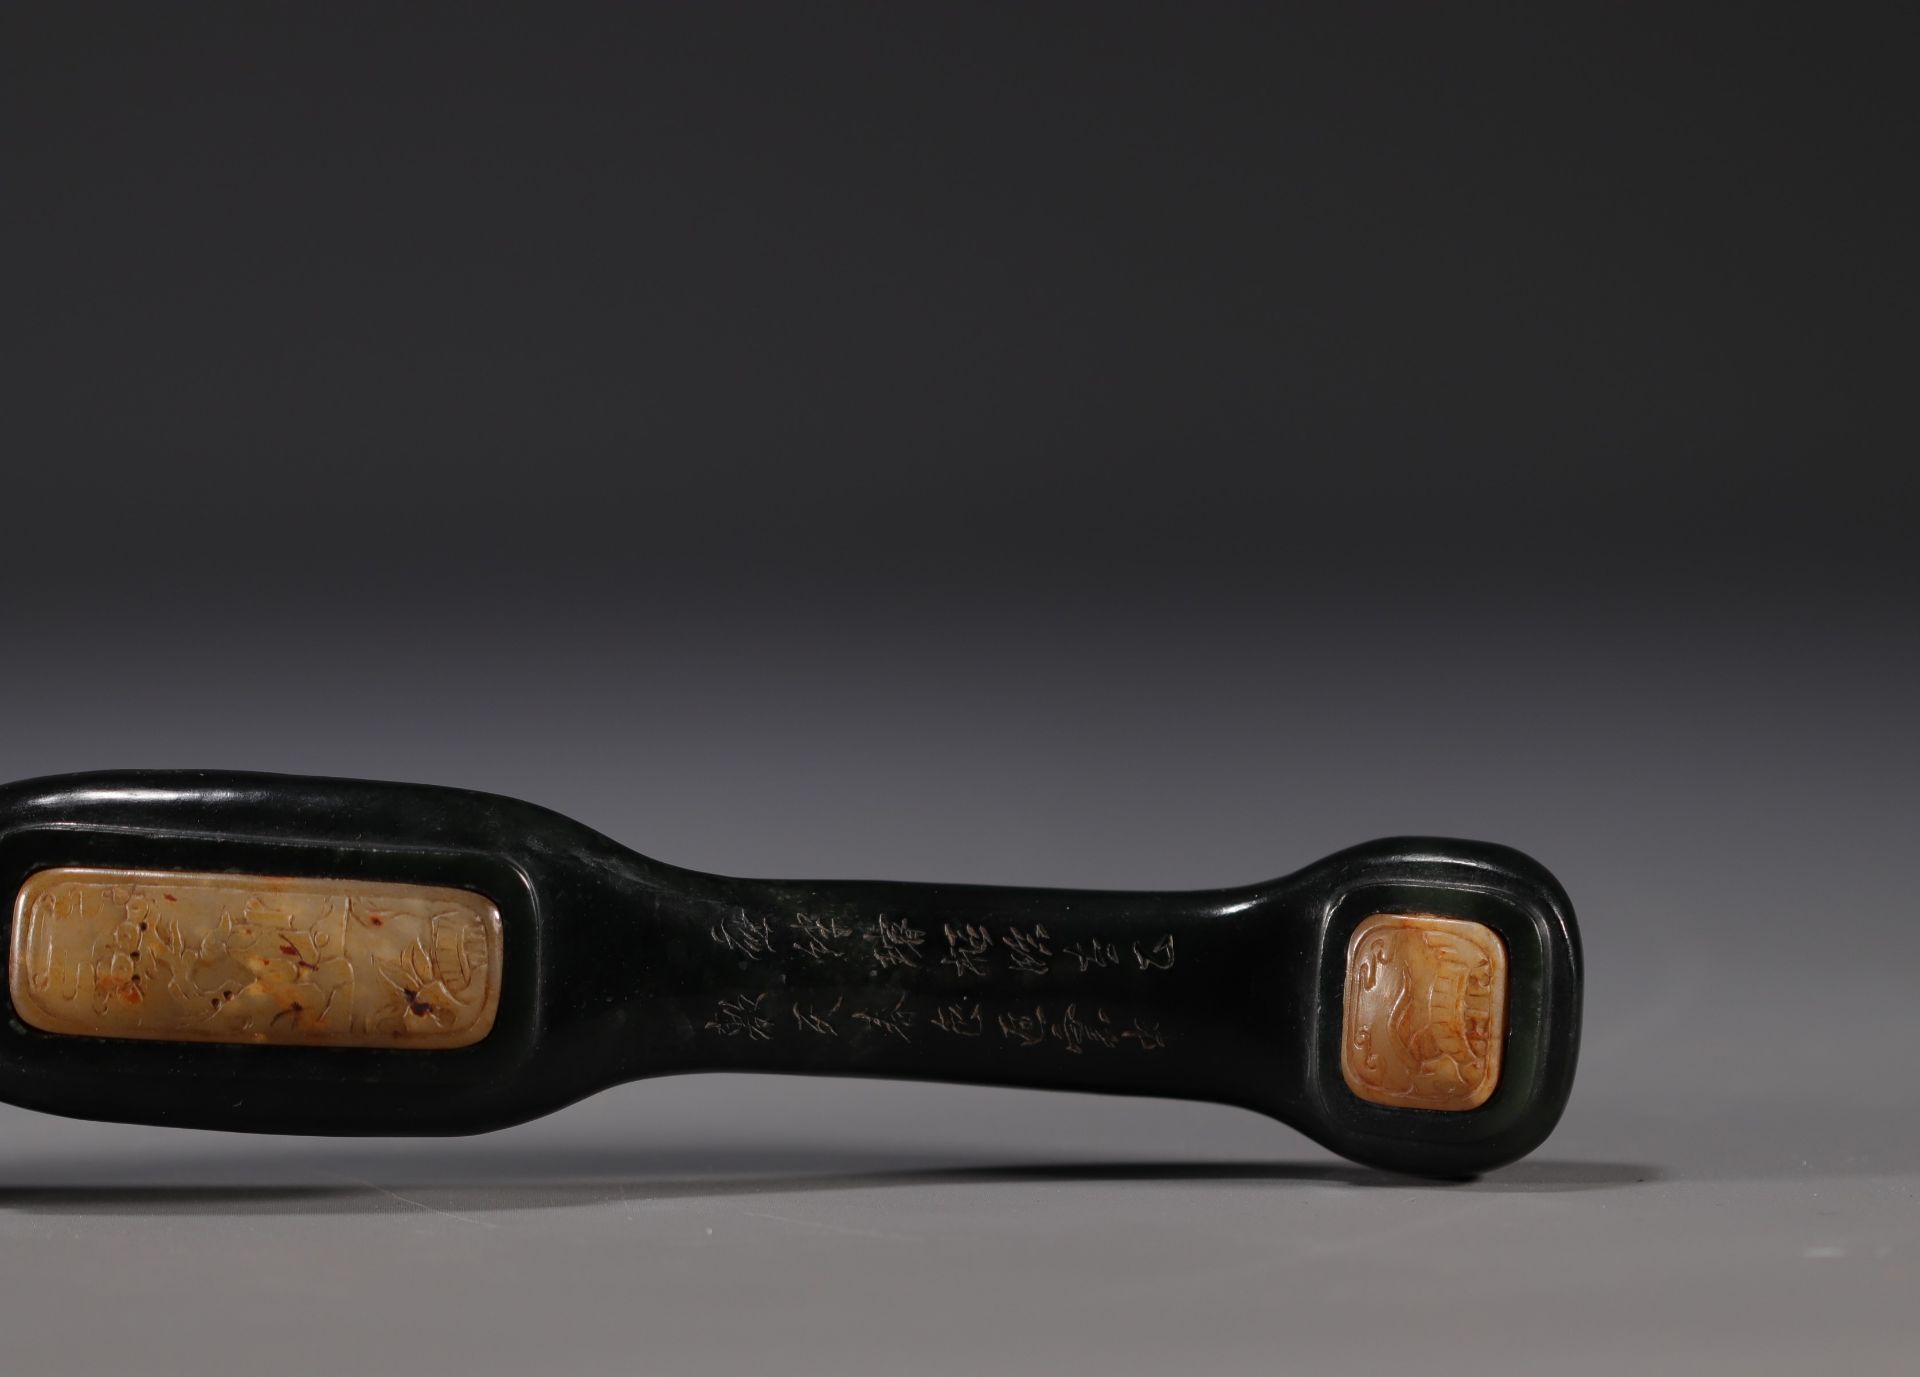 China - Dark green hardstone and carved jade Ruyi scepter with dignitary design, signed on the back. - Image 13 of 15